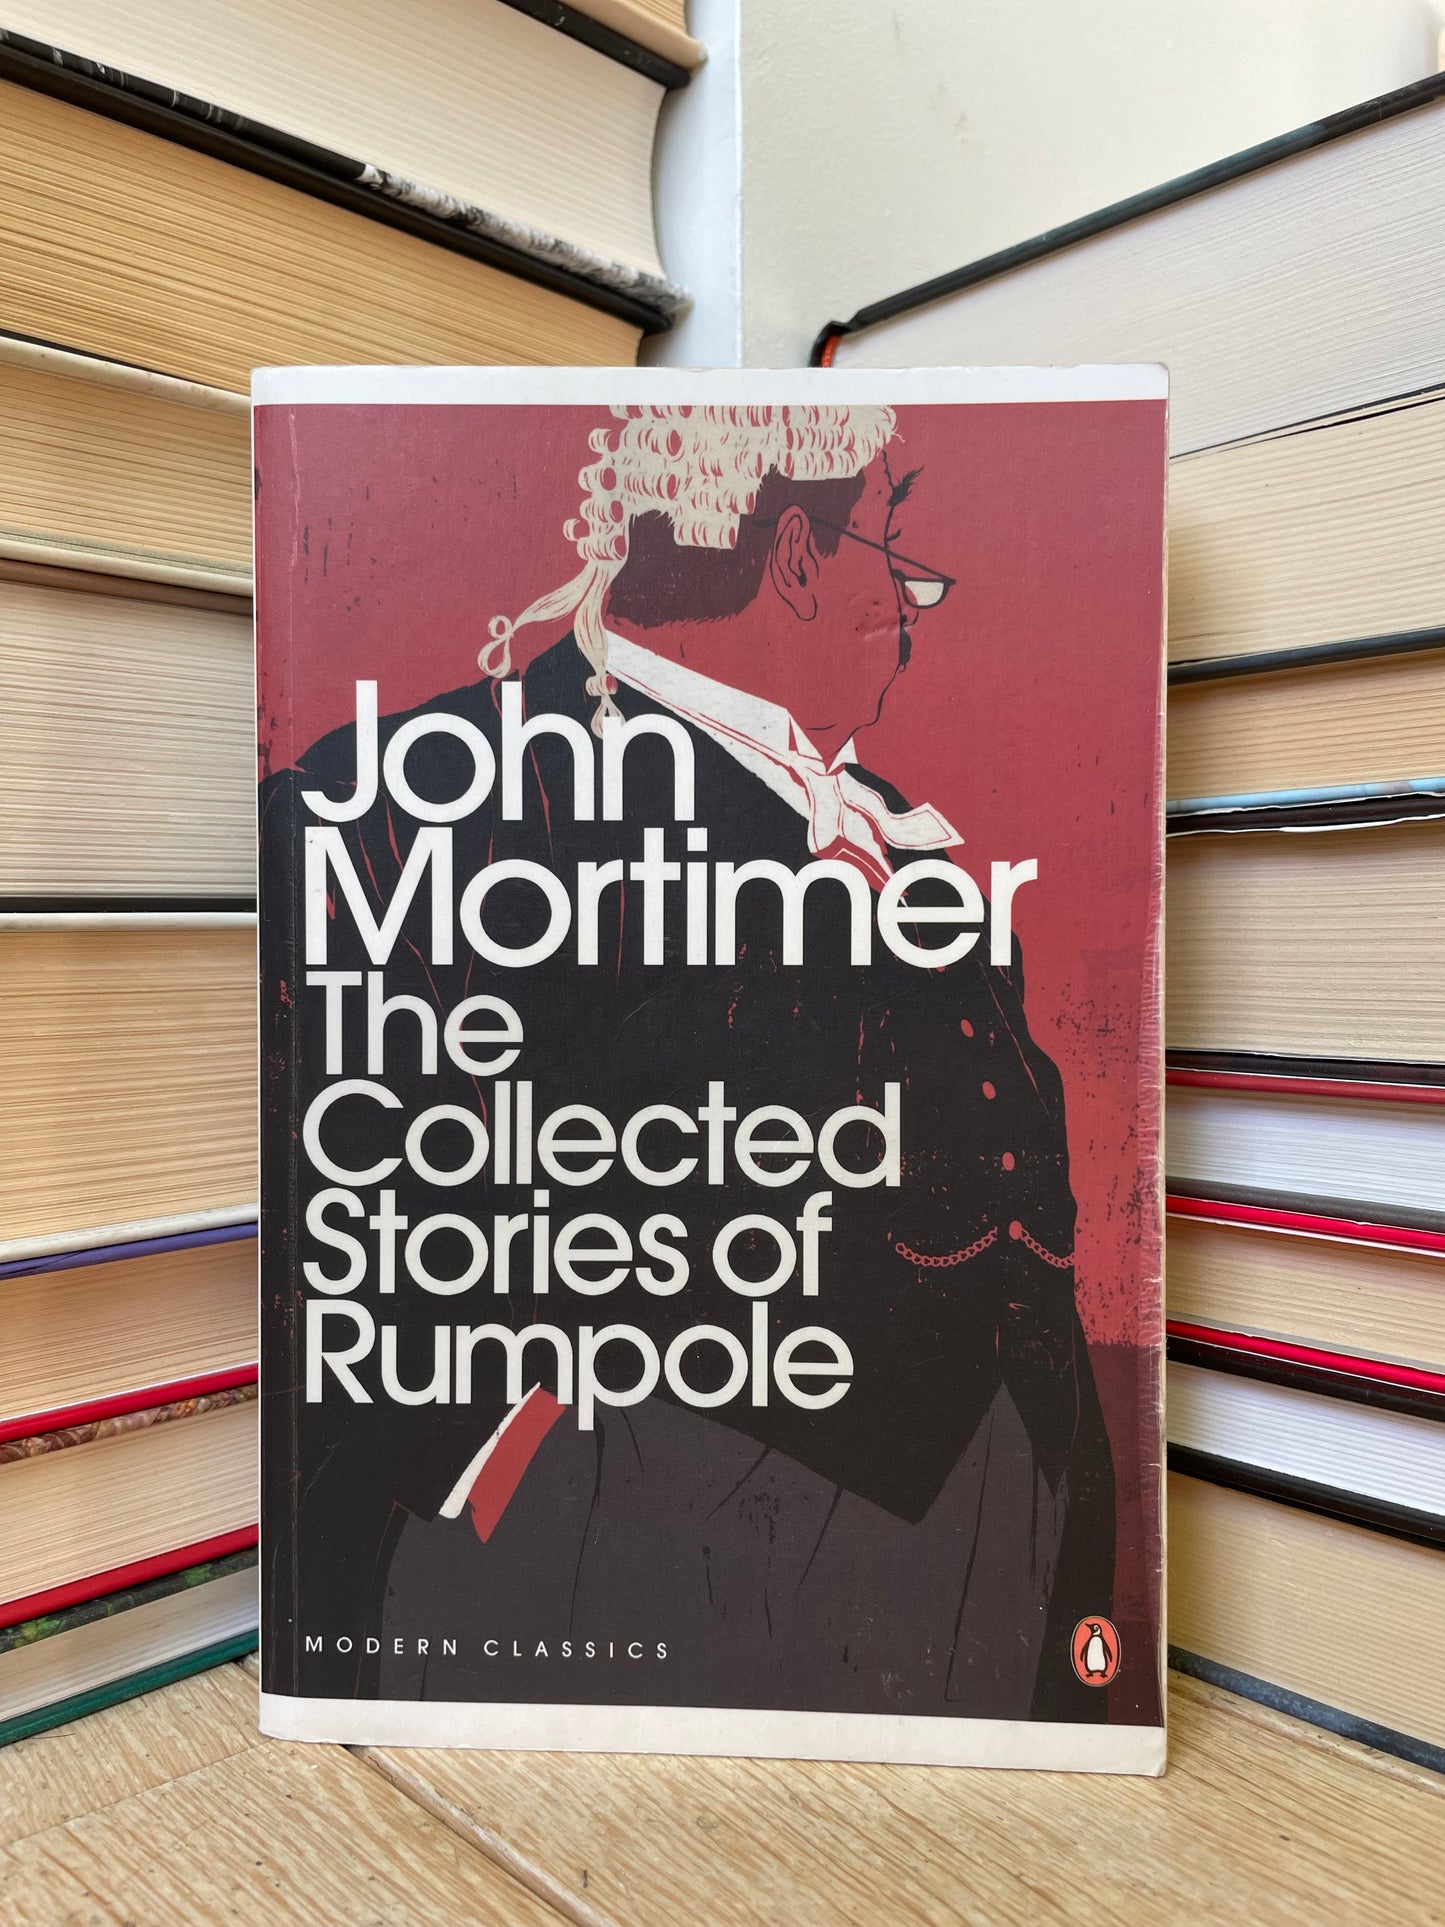 John Mortimer - The Collected Stories of Rumpole